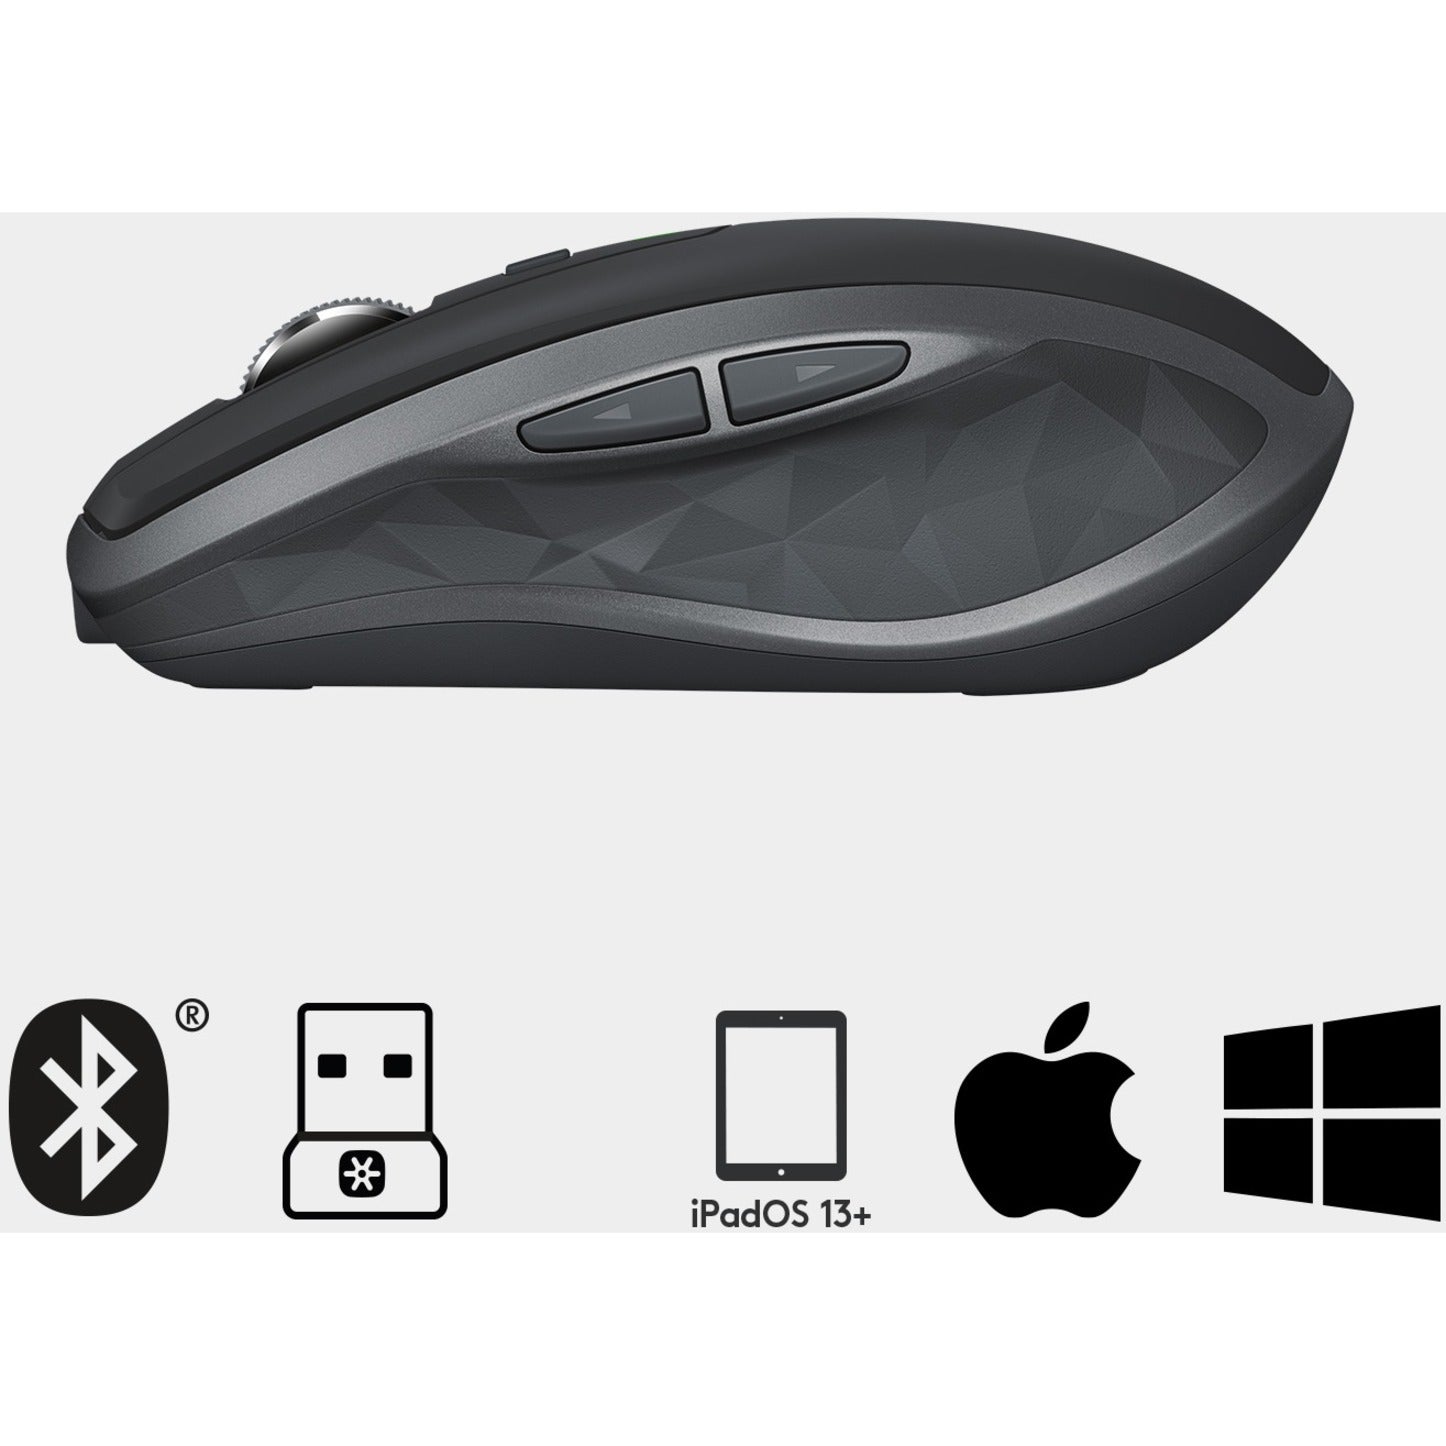 Logitech 910-006210 MX Anywhere 2S Mouse, Wireless Mobile Mouse with Darkfield Technology, 4000 DPI, Rechargeable, USB Interface